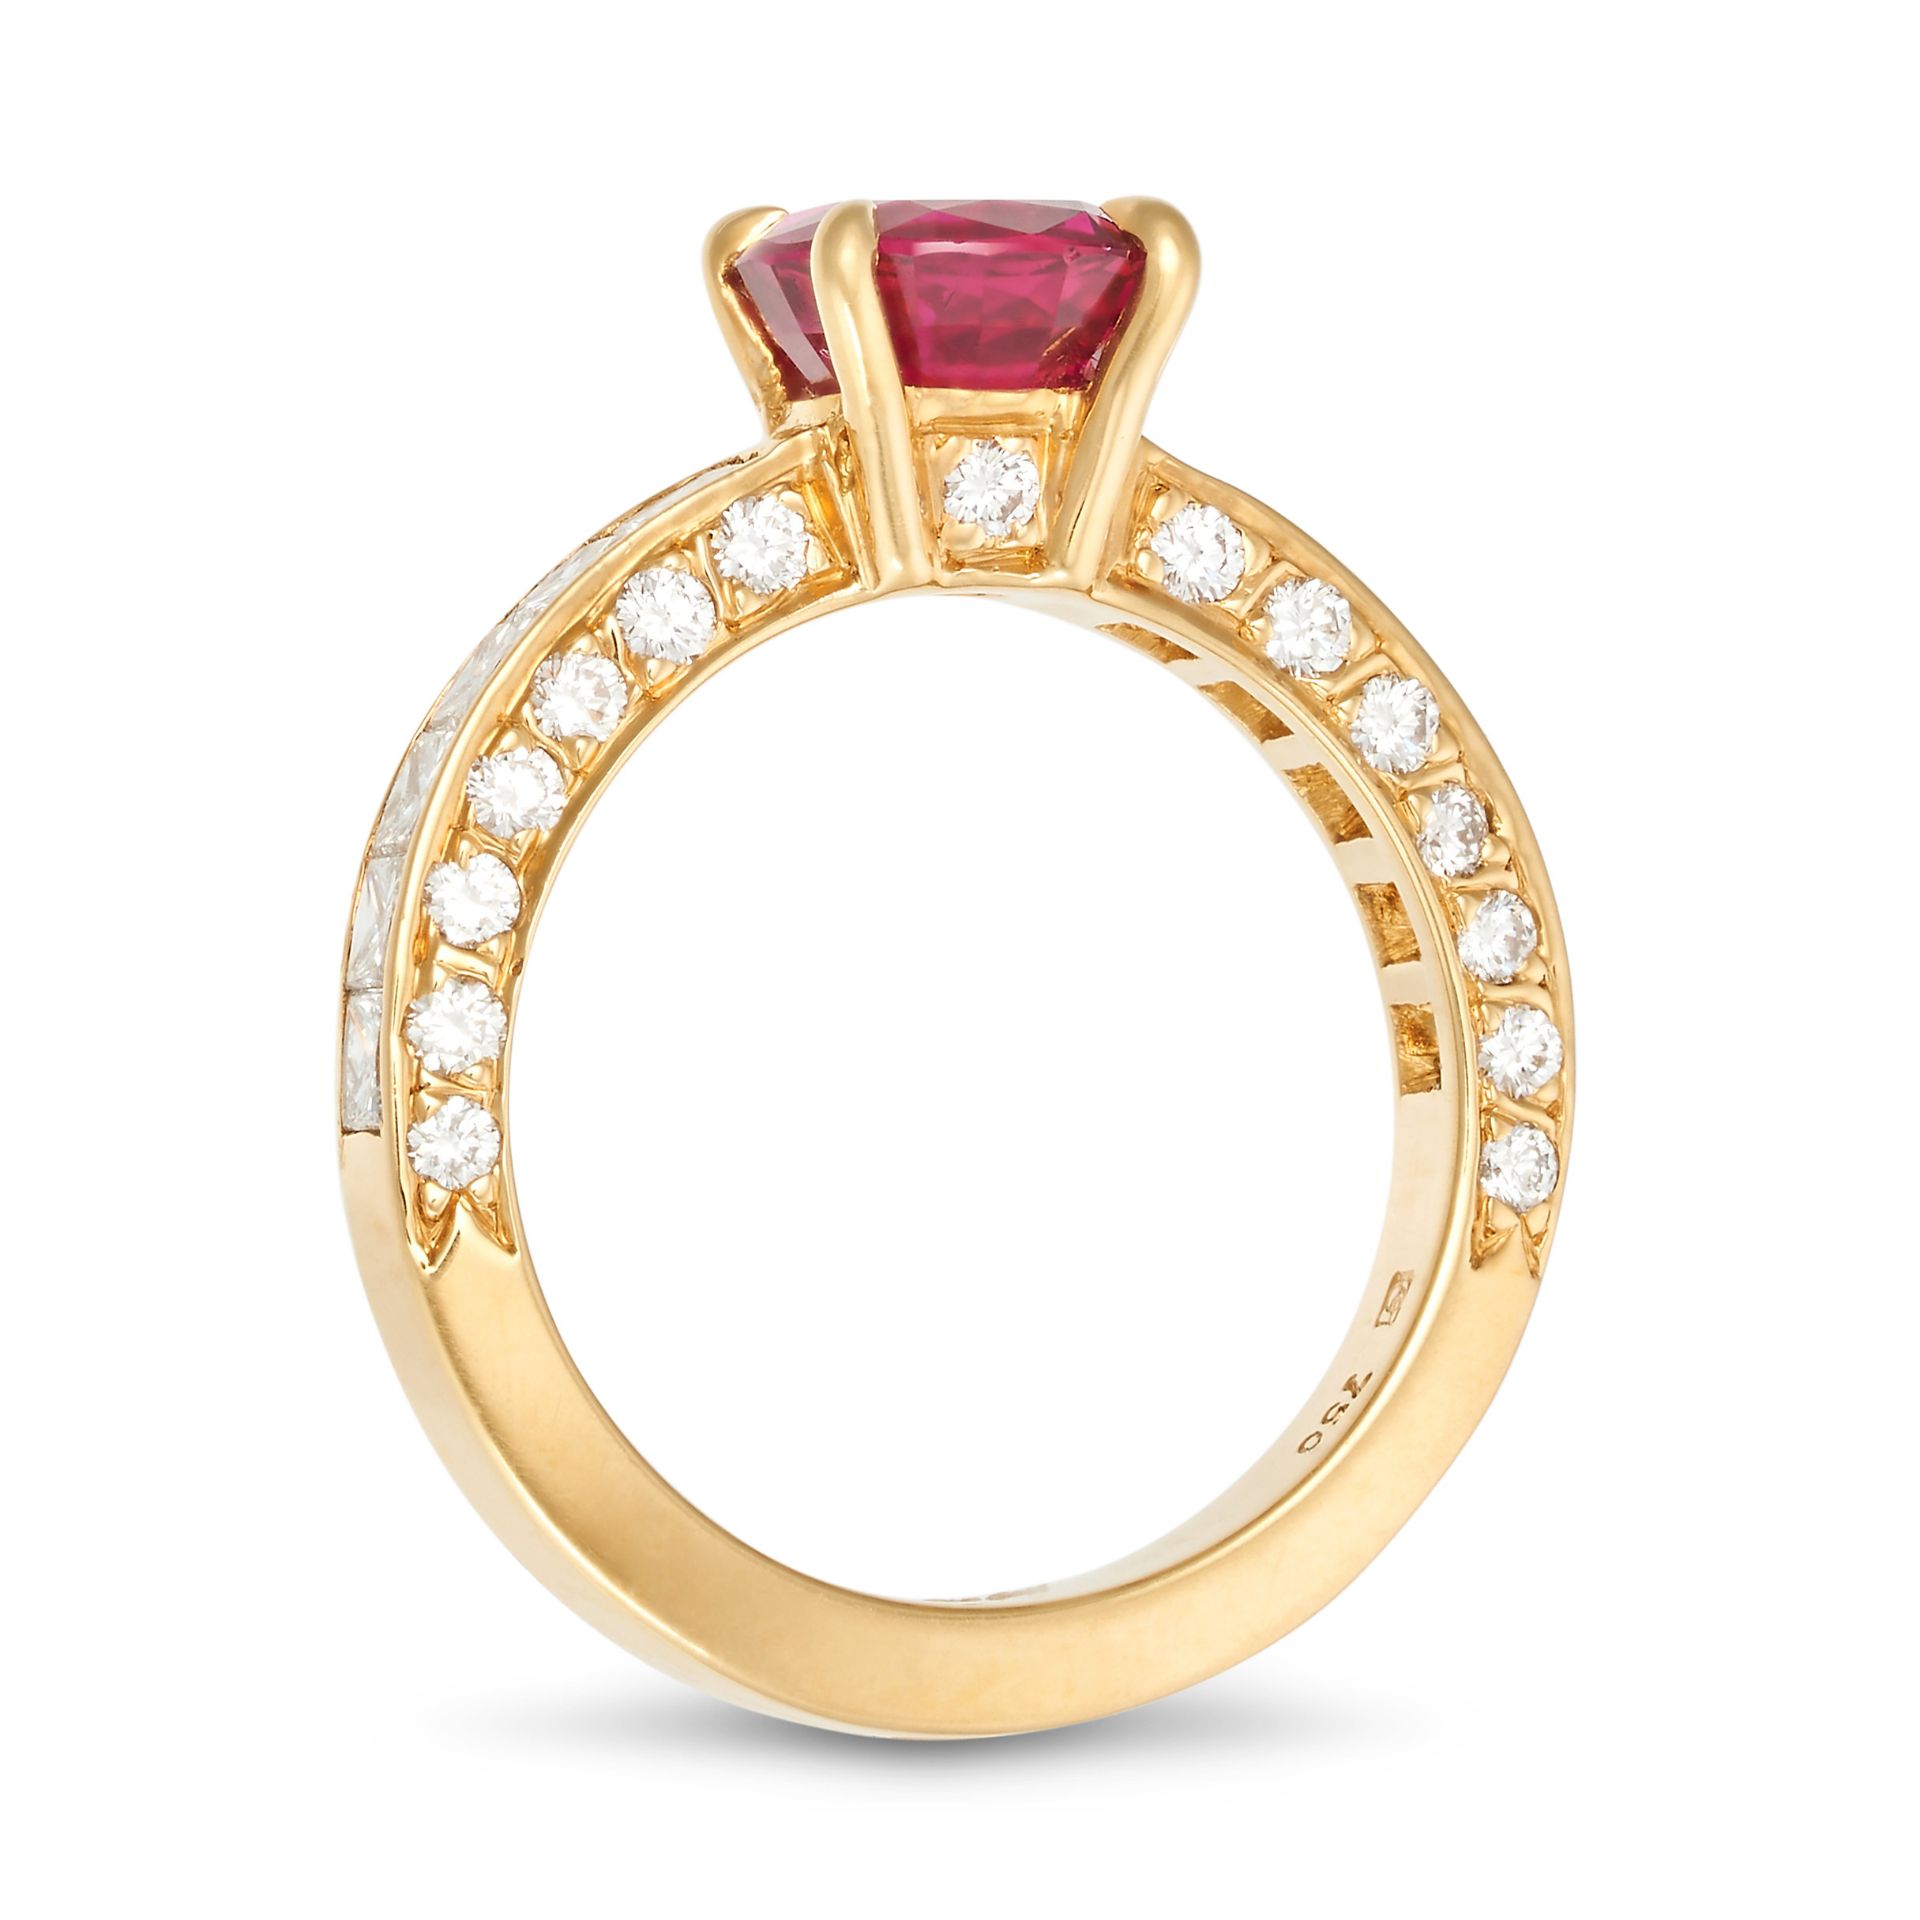 A RUBY AND DIAMOND RING in 18ct yellow gold, set with an oval cut ruby of approximately 1.58 cara... - Image 2 of 2